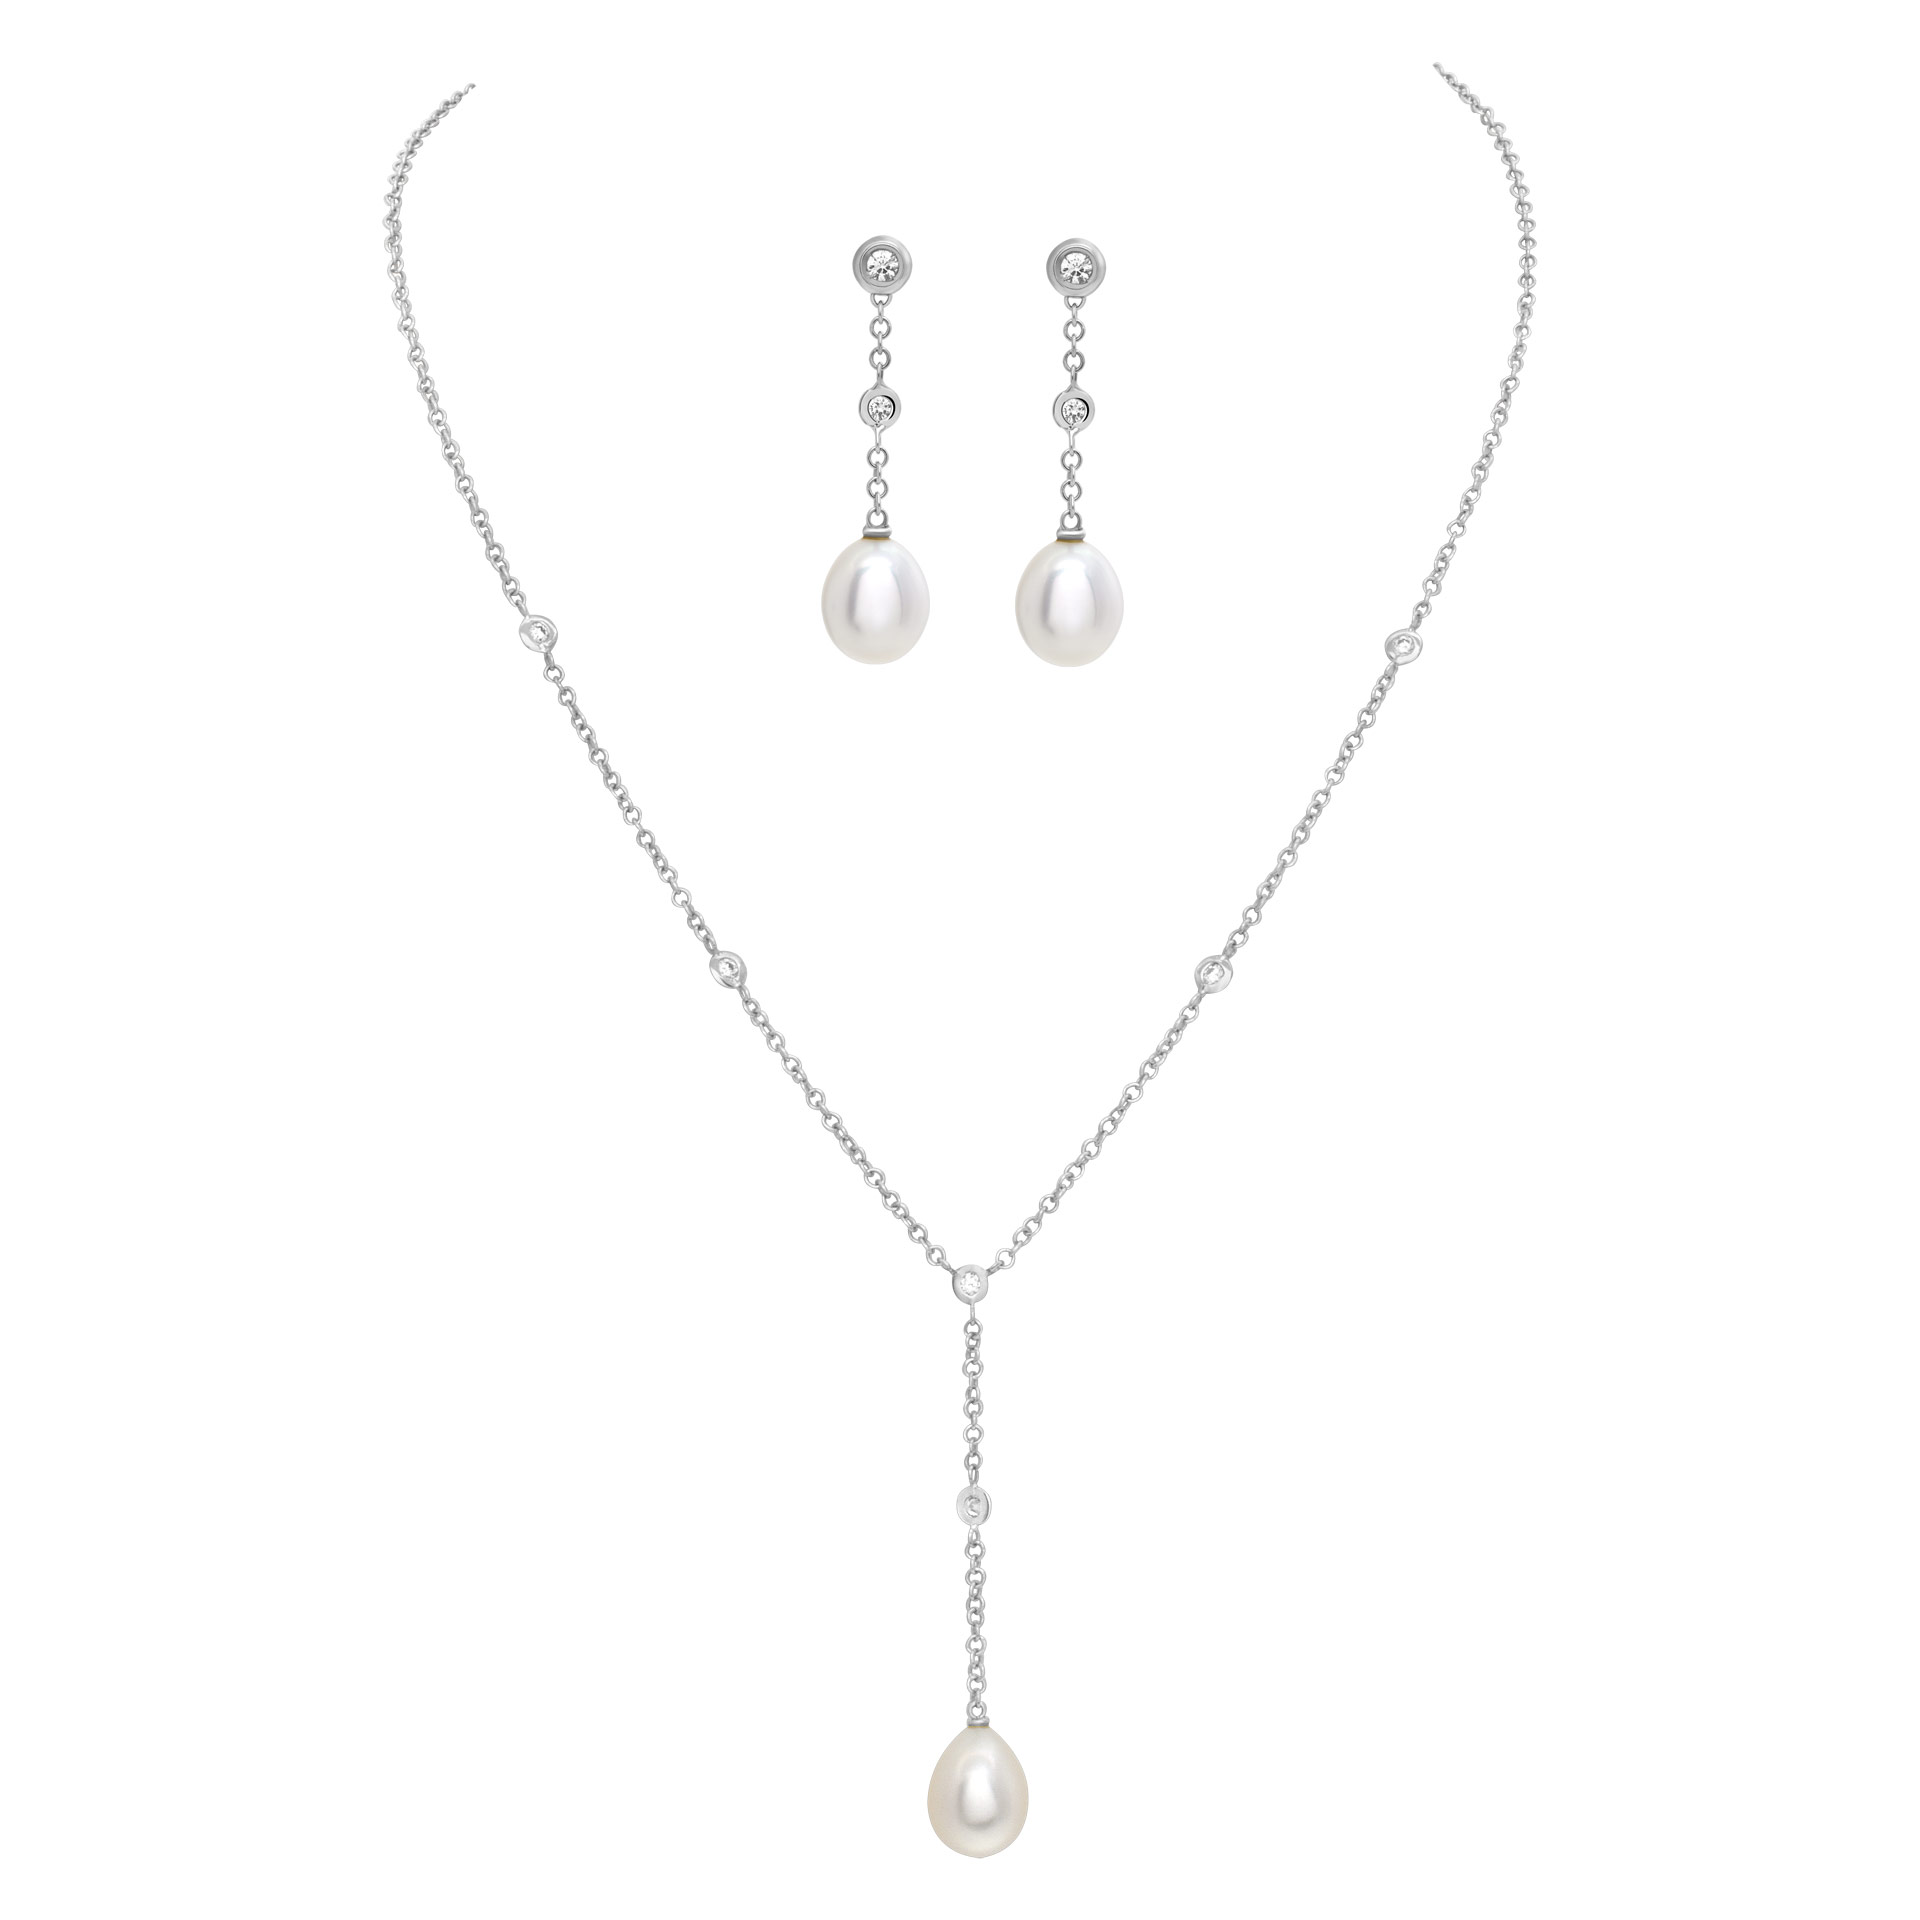 Pearl and diamond necklace and earrings set in 18k white gold image 1